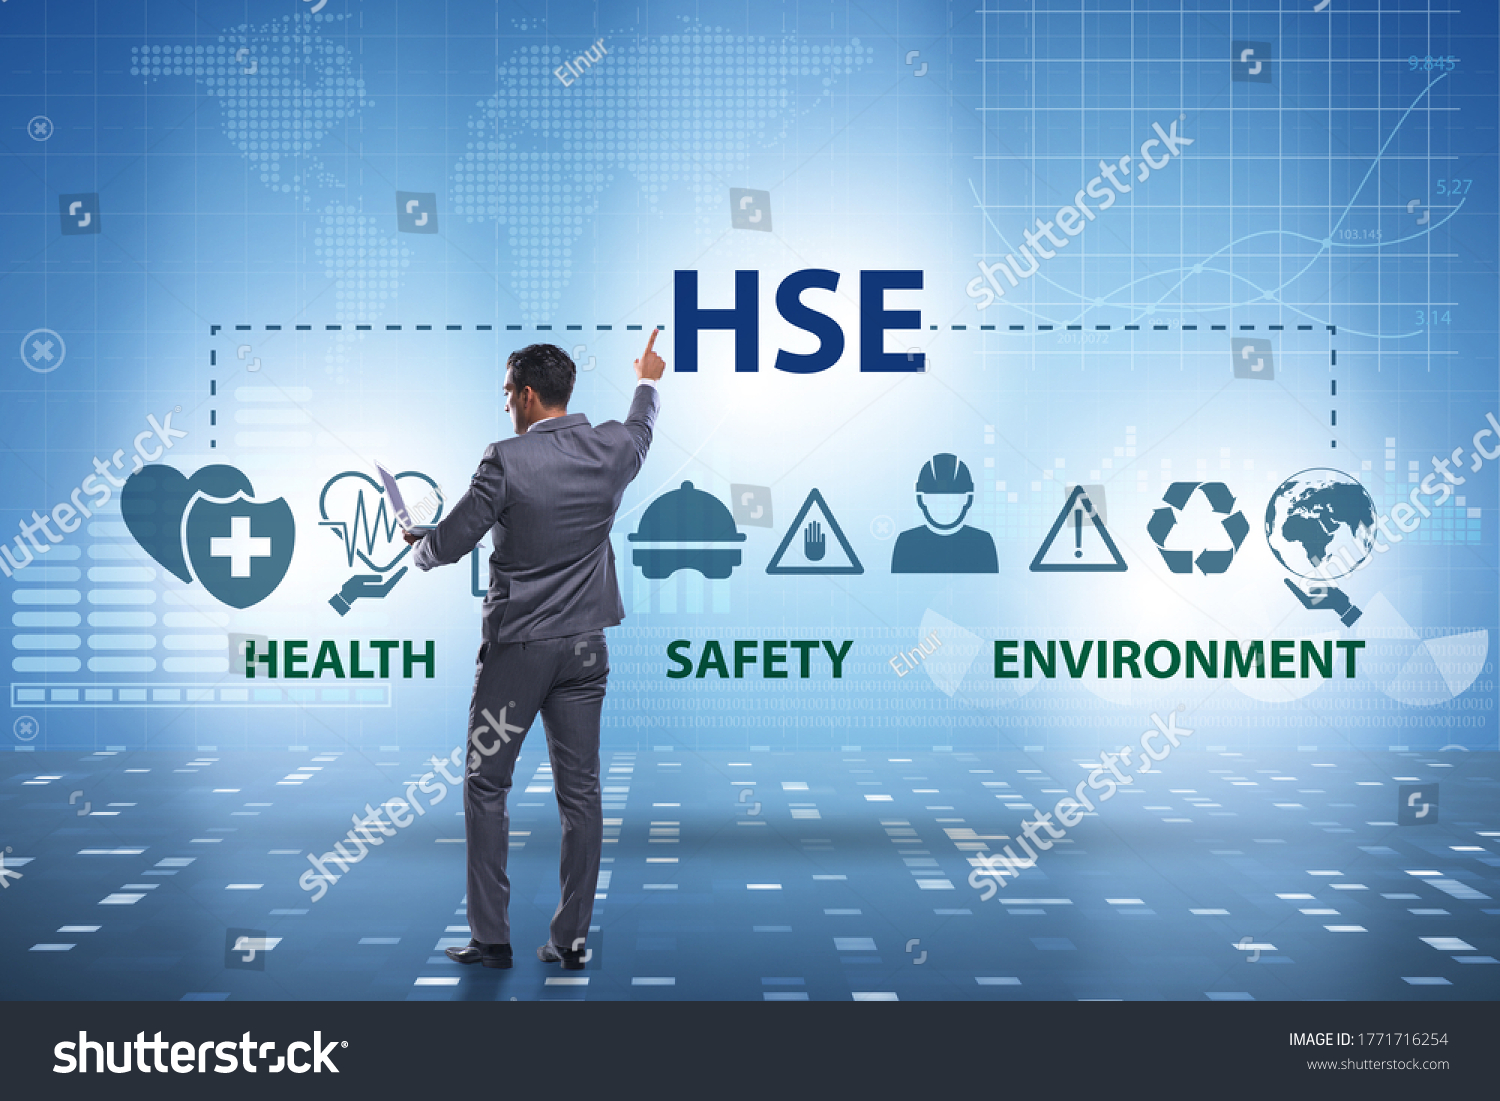 basic occupational safety and health powerpoint presentation